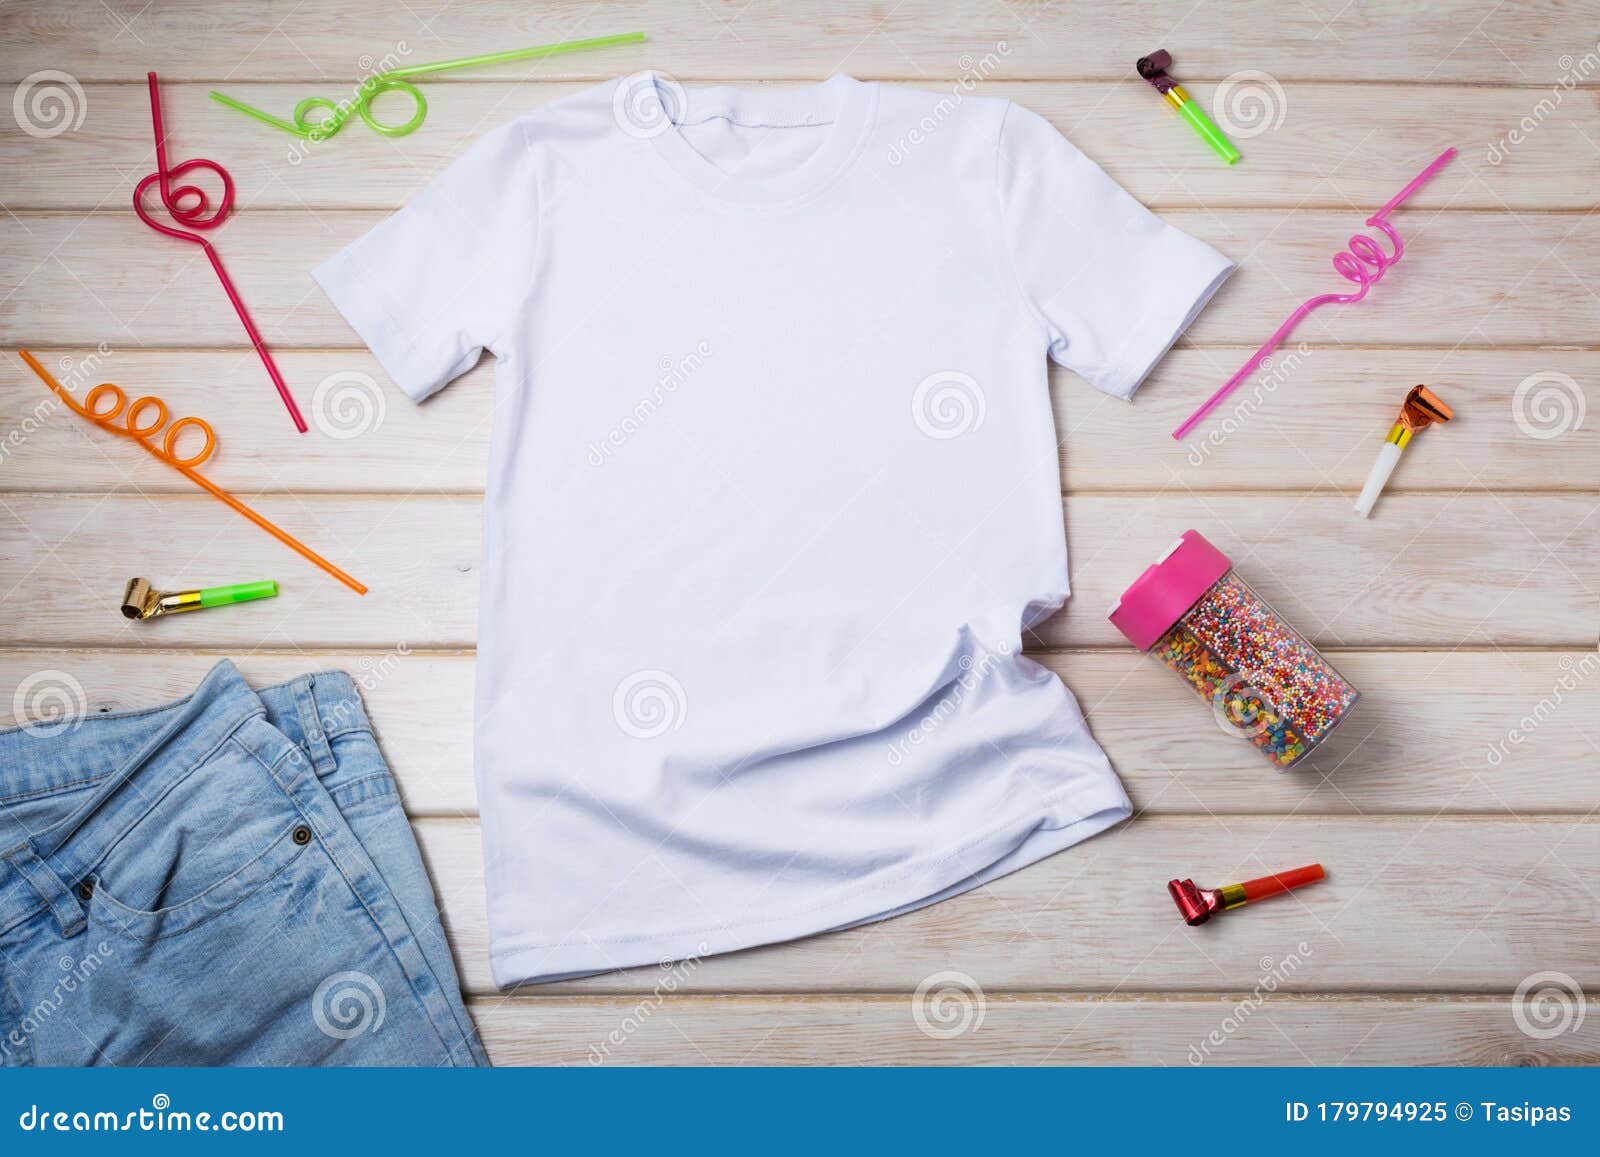 Download Kids T Shirt Mockup With Birthday Party Decor Stock Image Image Of Retail Shirt 179794925